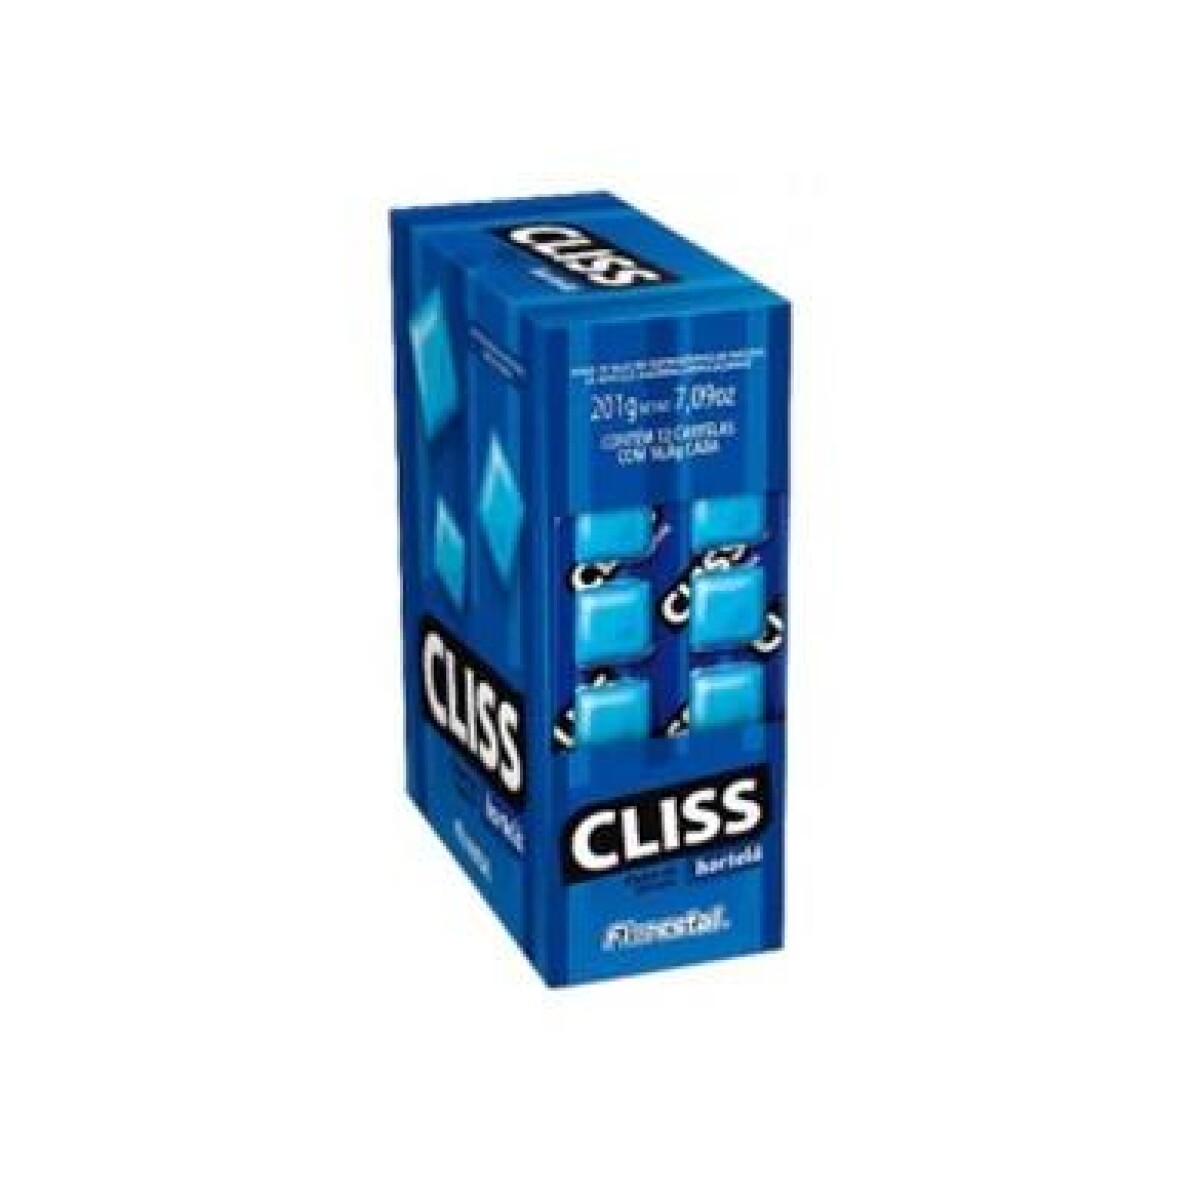 Chicle CLISS BLISTER 12pcs 201grs - Mentól 